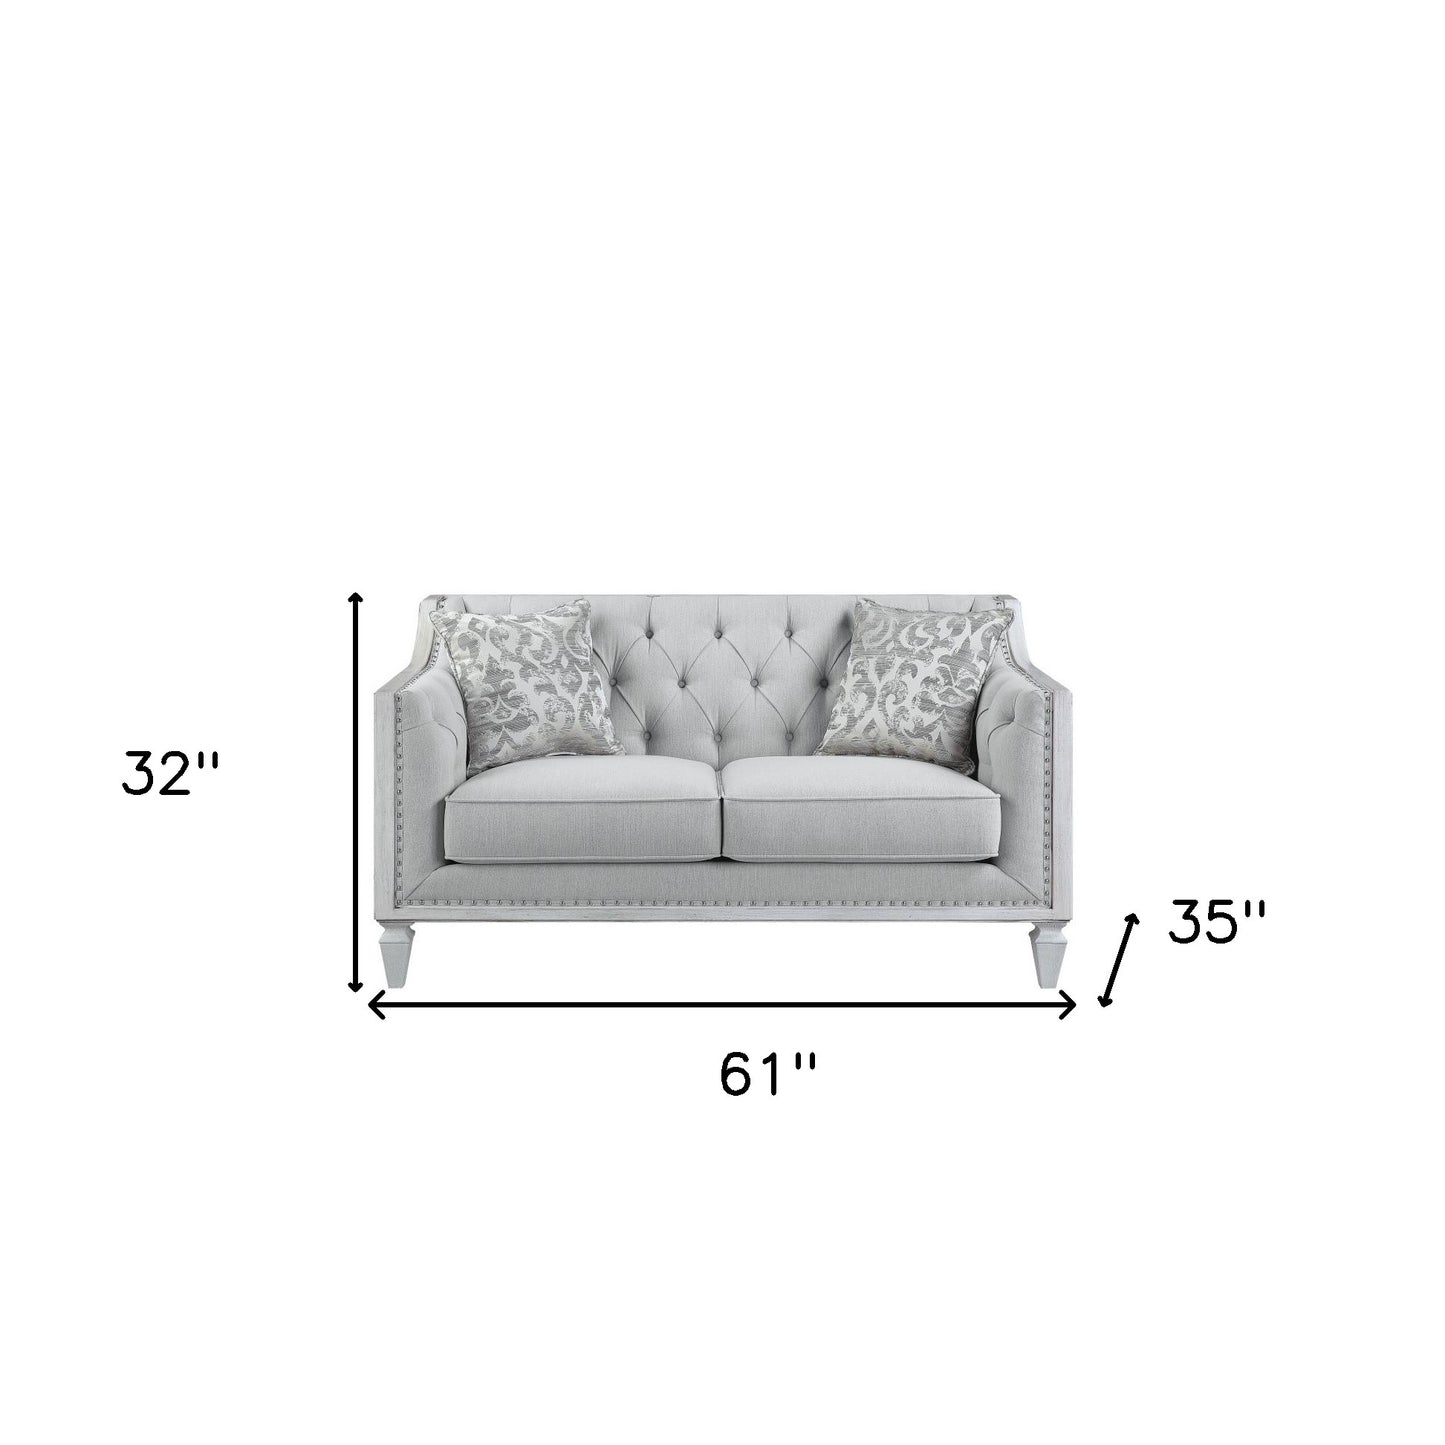 61" Light Gray And Off White Loveseat and Toss Pillows